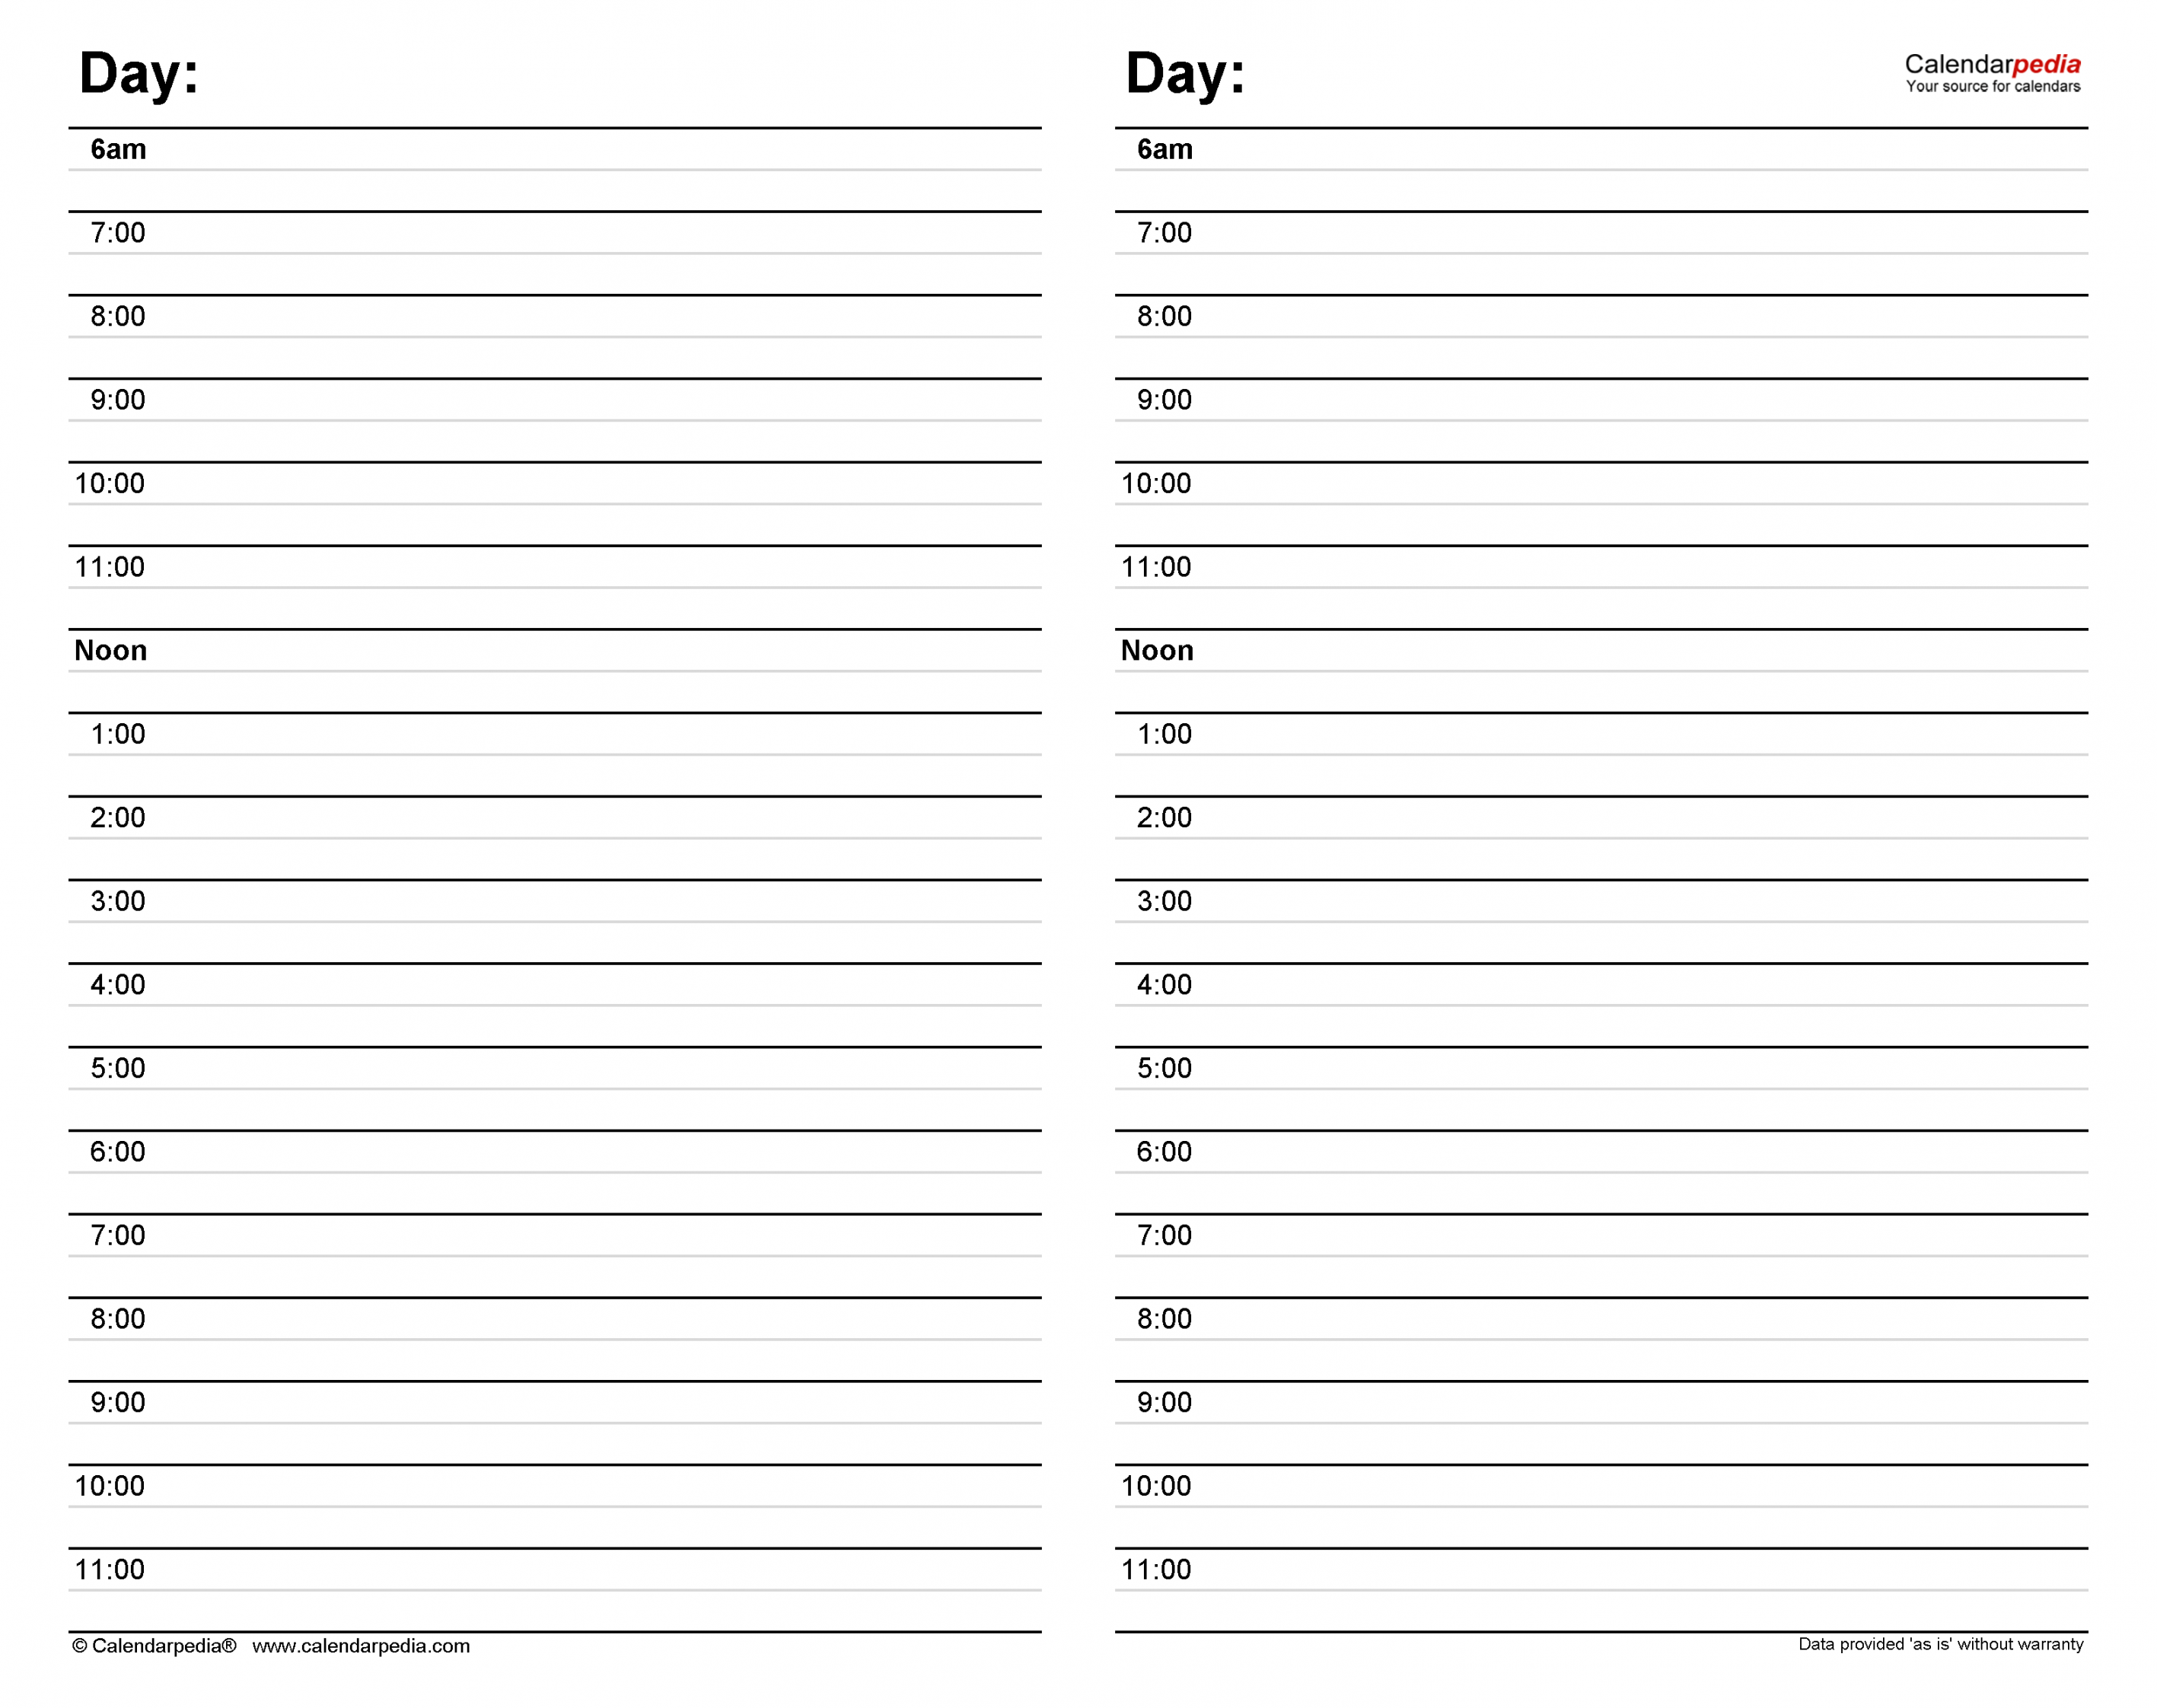 Free Daily Schedules in PDF Format - + Templates